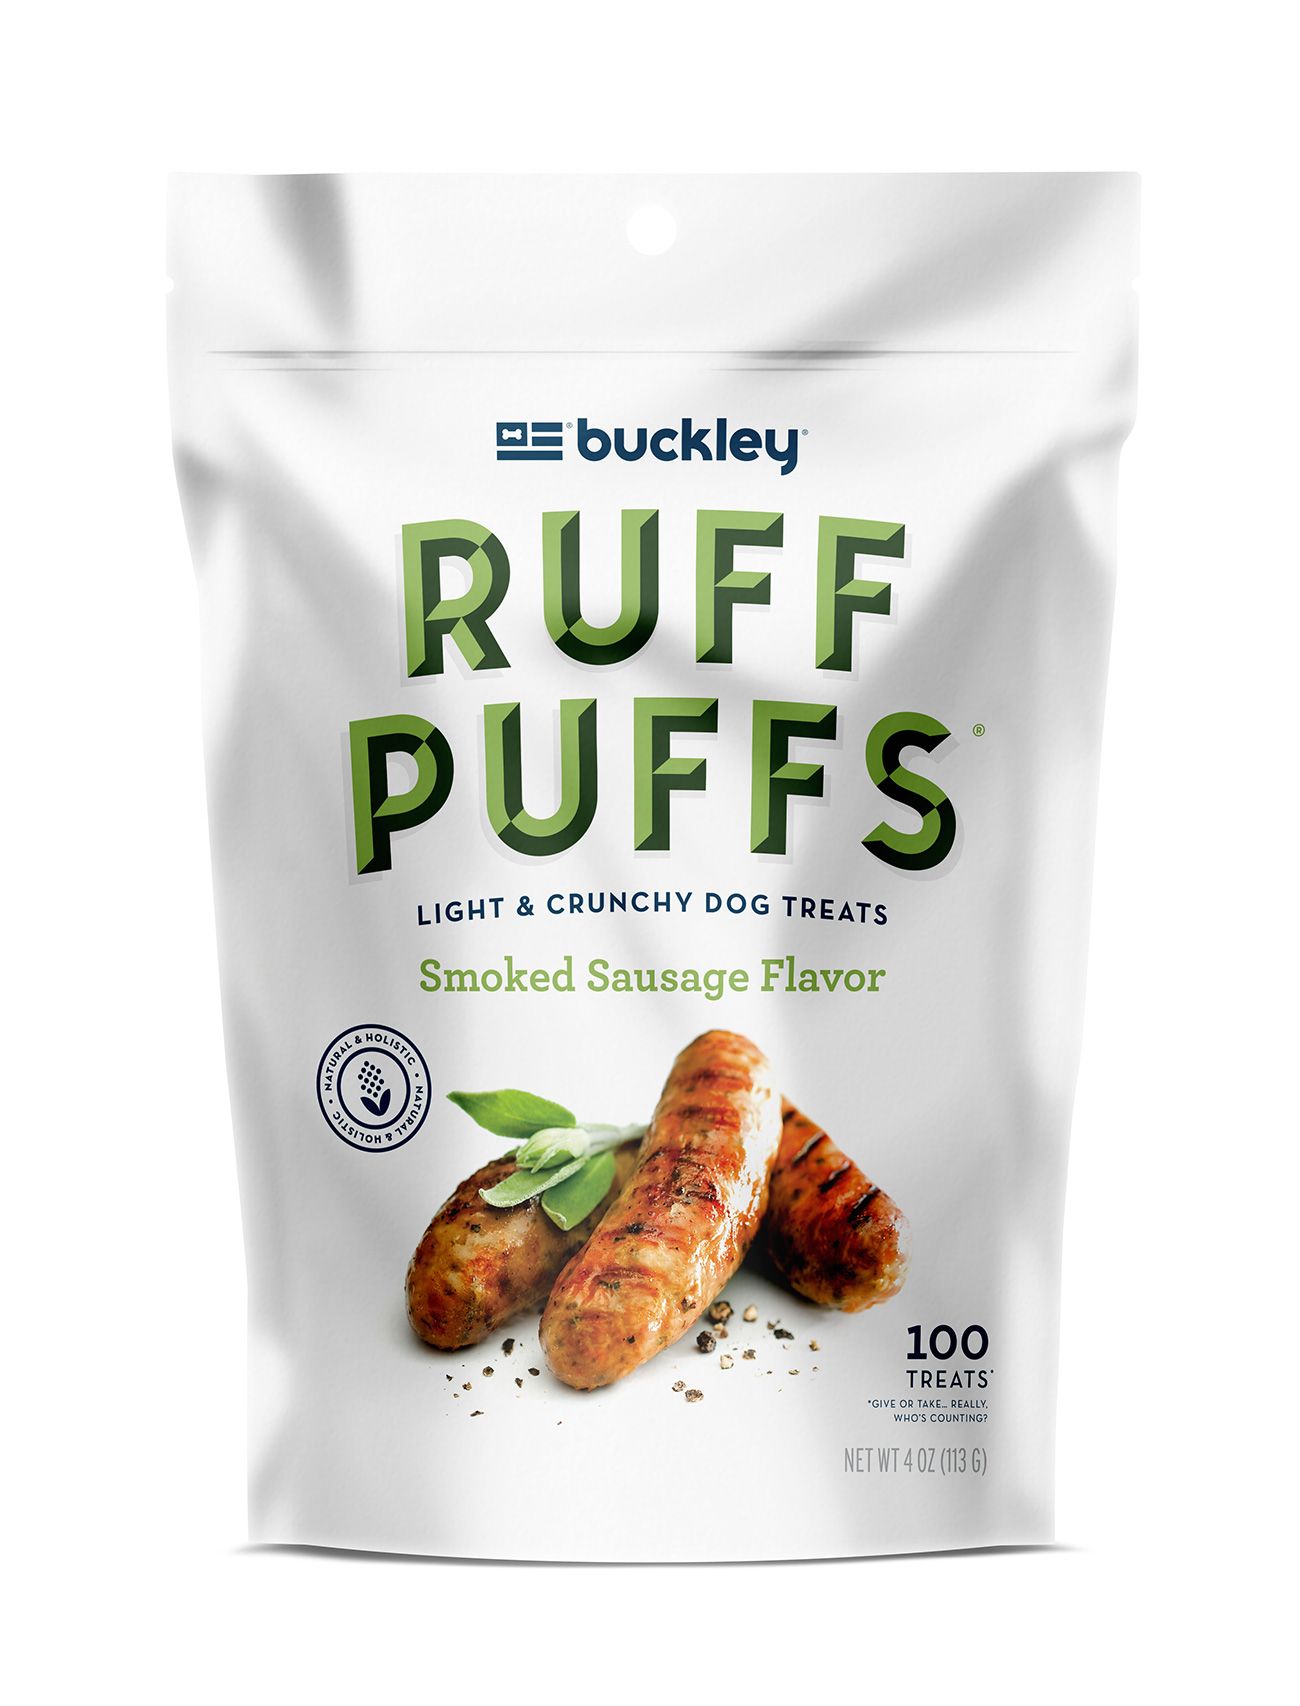 Buckley Ruff Puffs — Hampton Hargreaves / Design for Print, Packaging ...